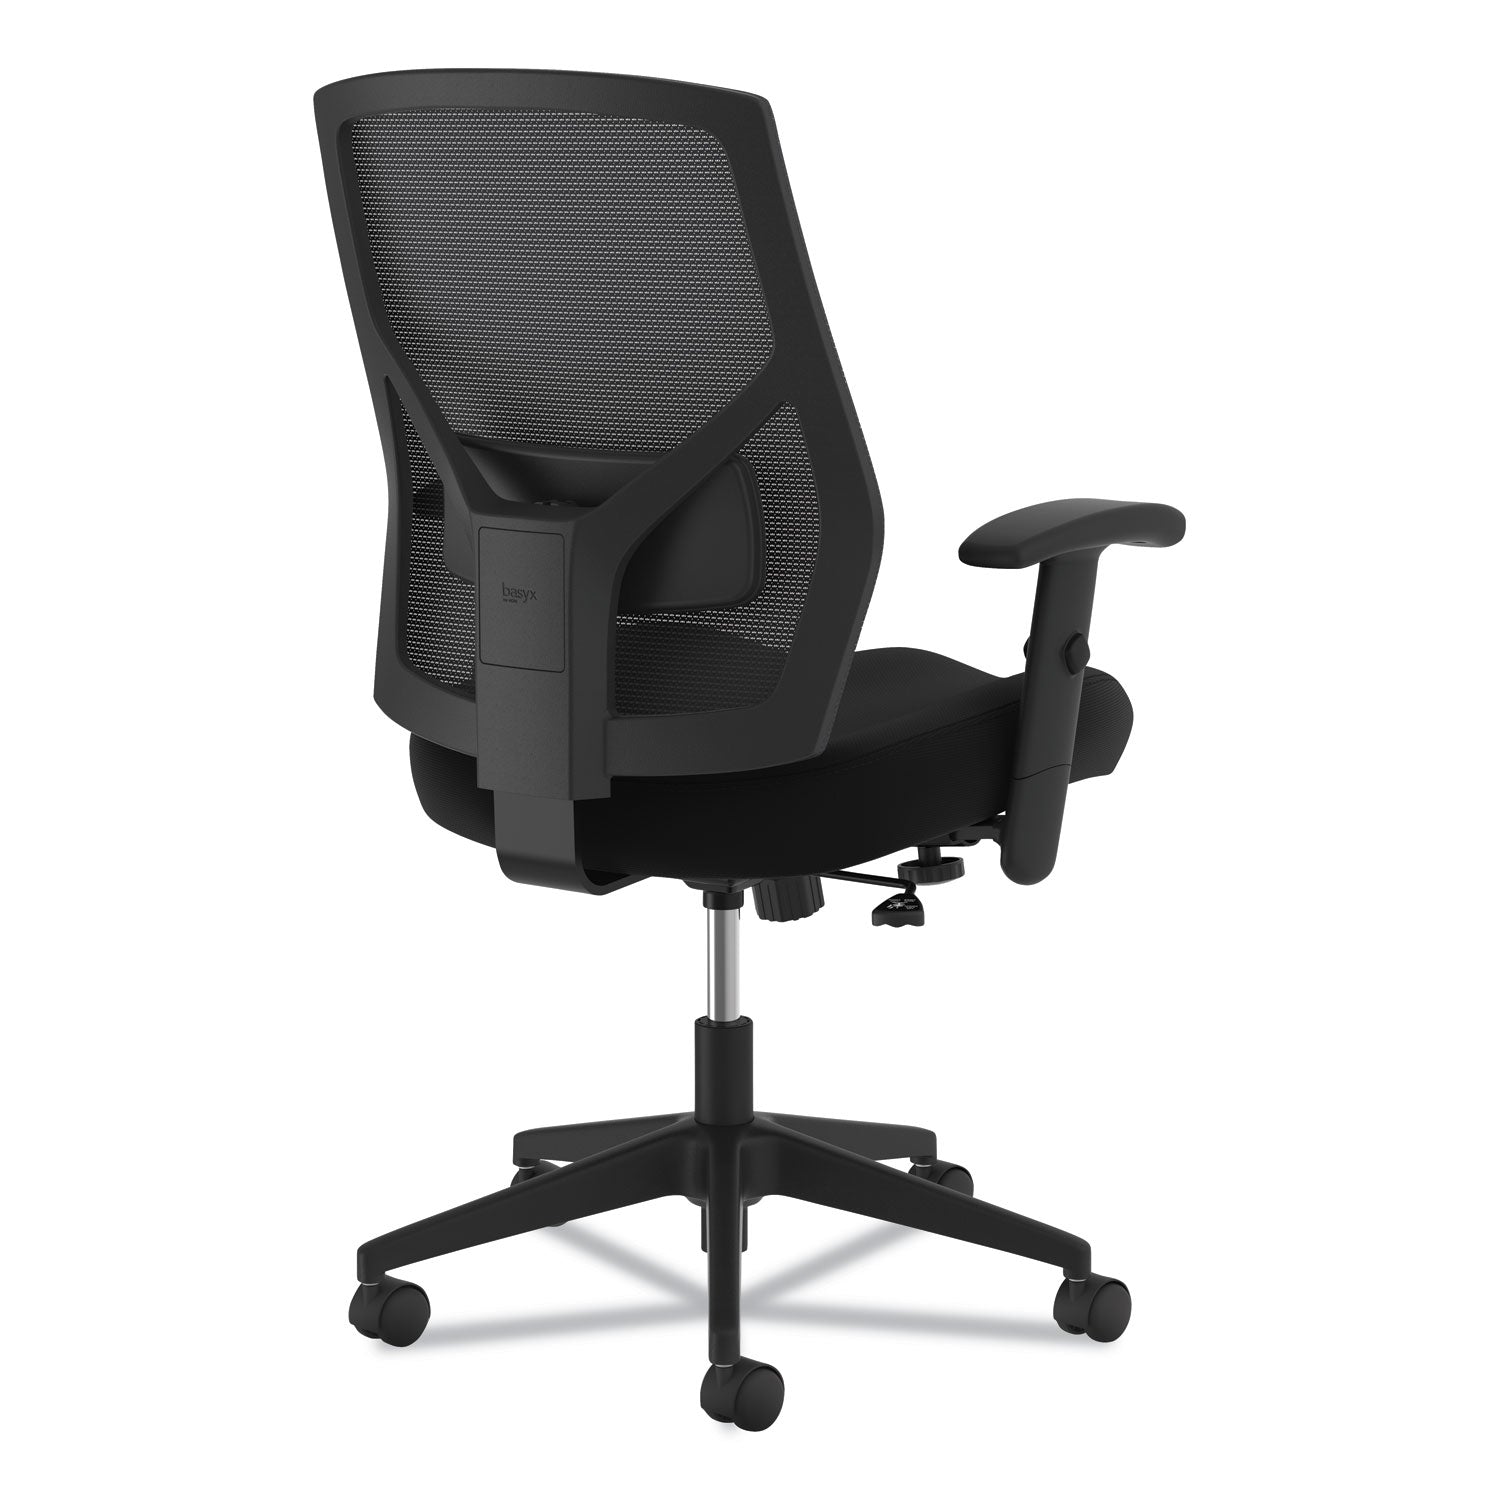 vl581-high-back-task-chair-supports-up-to-250-lb-18-to-22-seat-height-black_bsxvl581es10t - 5